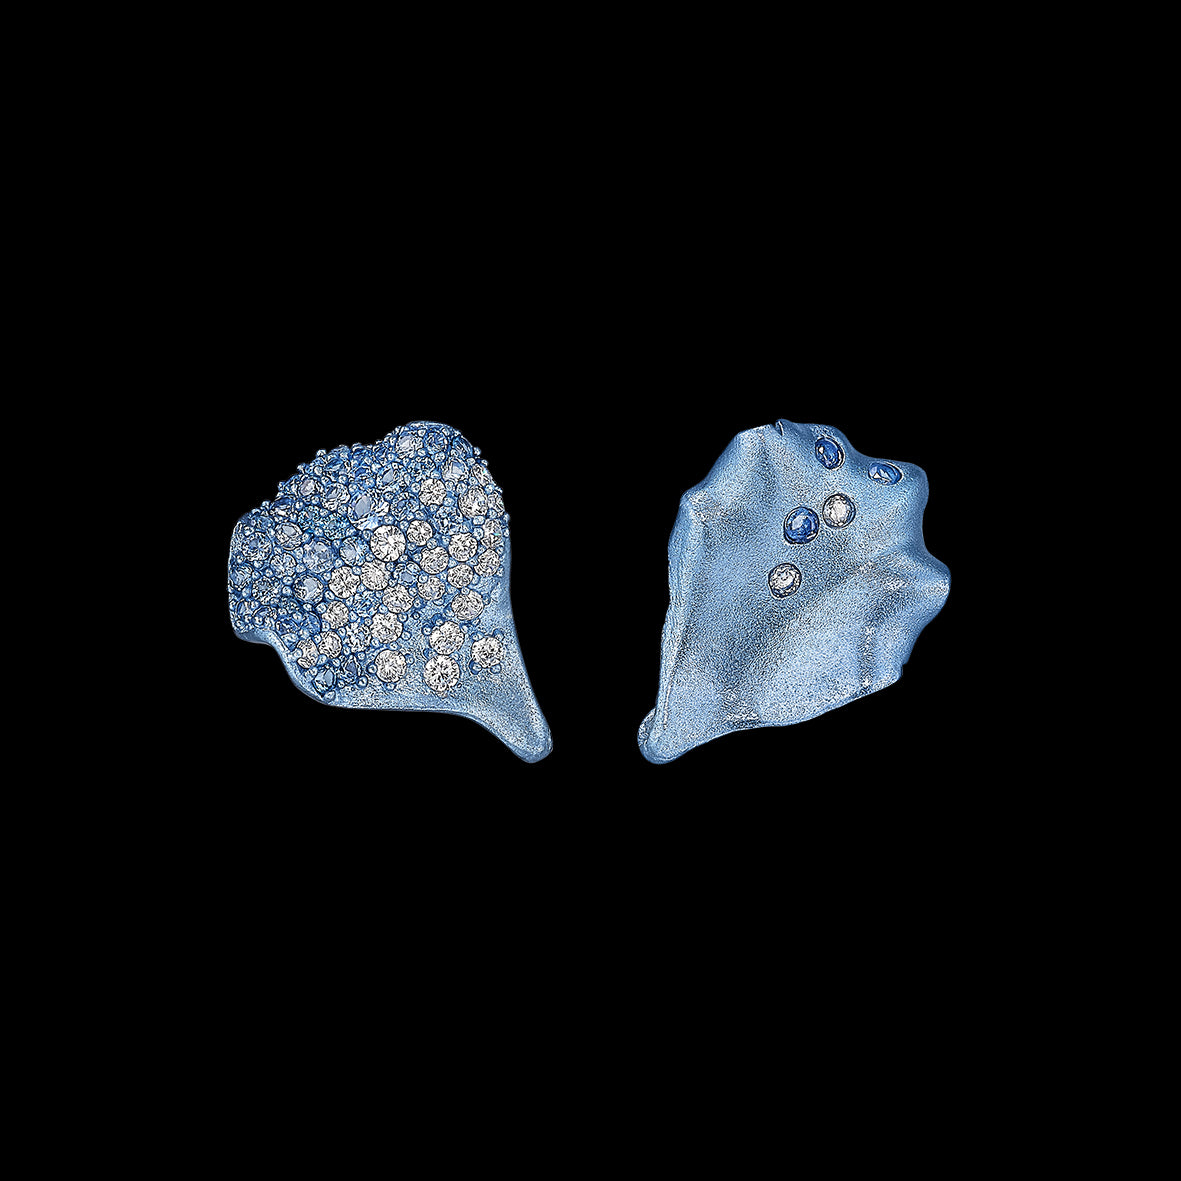 Baby Blue Petal Studs, Earrings, Anabela Chan Joaillerie - Fine jewelry with laboratory grown and created gemstones hand-crafted in the United Kingdom. Anabela Chan Joaillerie is the first fine jewellery brand in the world to champion laboratory-grown and created gemstones with high jewellery design, artisanal craftsmanship and a focus on ethical and sustainable innovations.